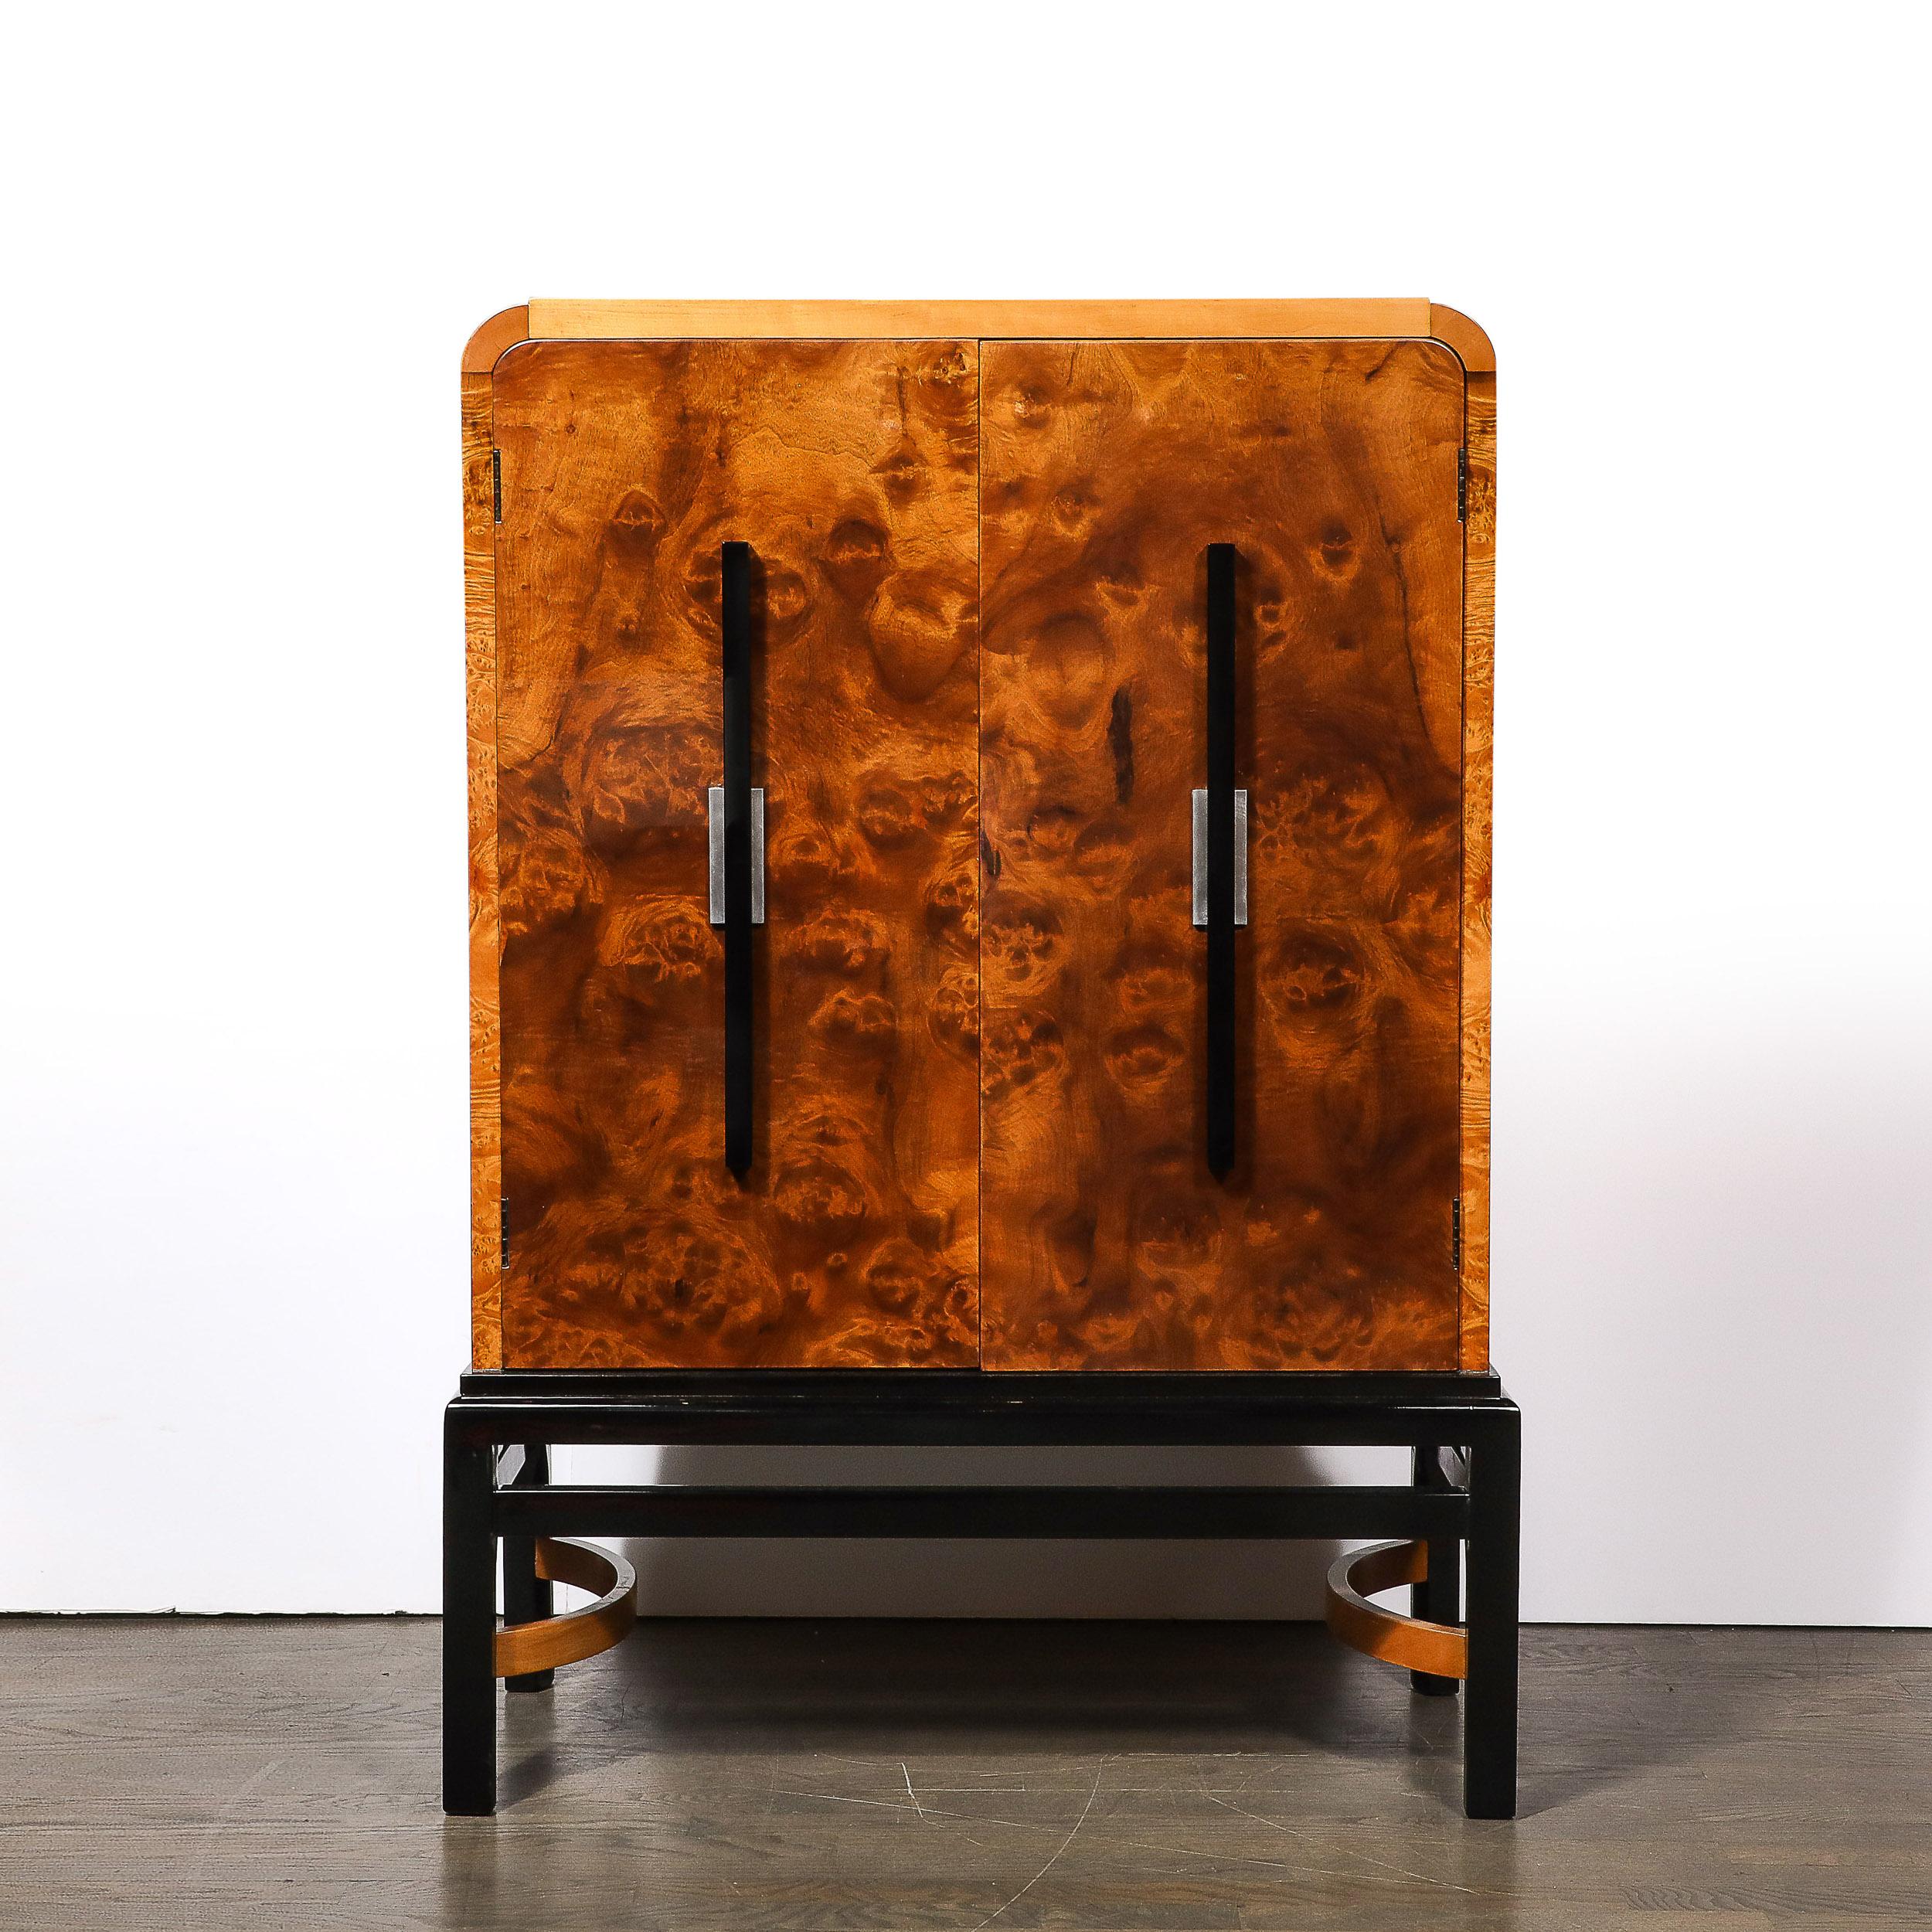 American Art Deco Burled Walnut Bar Cabinet by Donald Deskey for the Hastings Company